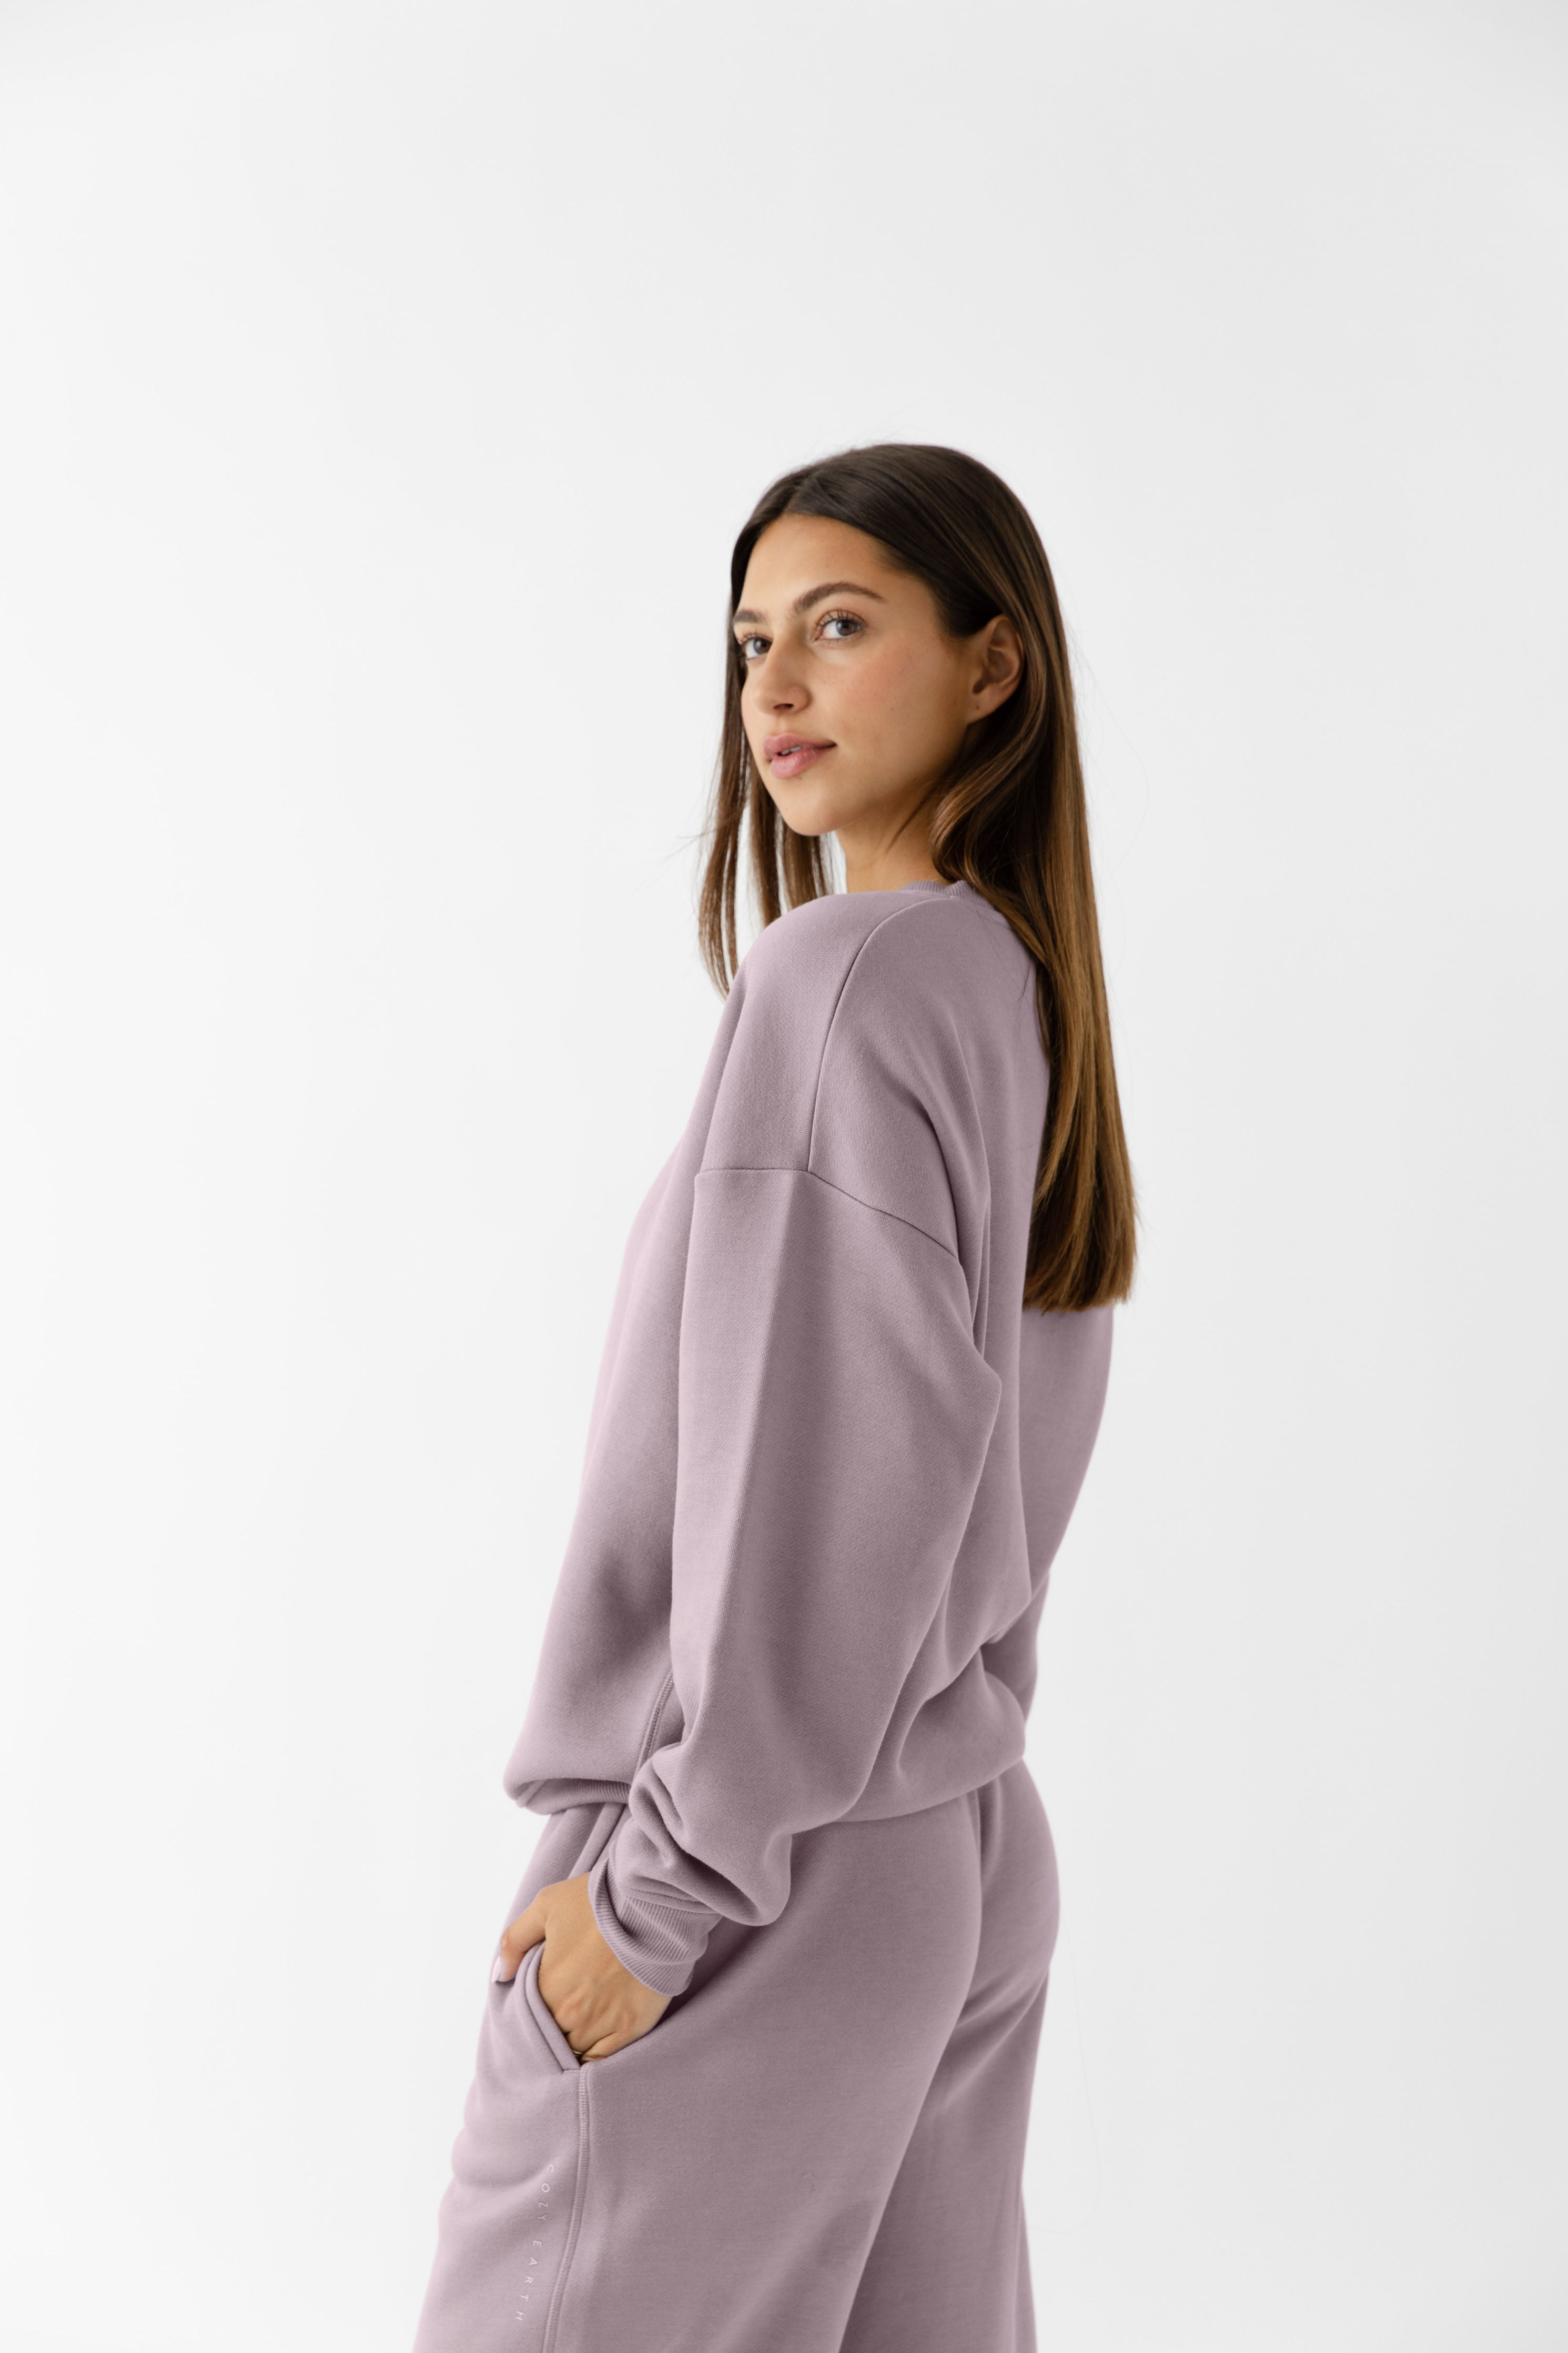 Dusty Orchid CityScape Pullover Crew. The Pullover is being worn by a female model. Accompanying city scape clothing is being worn to complete the look of the outfit. The photo was taken with a white background. |Color:Dusty Orchid